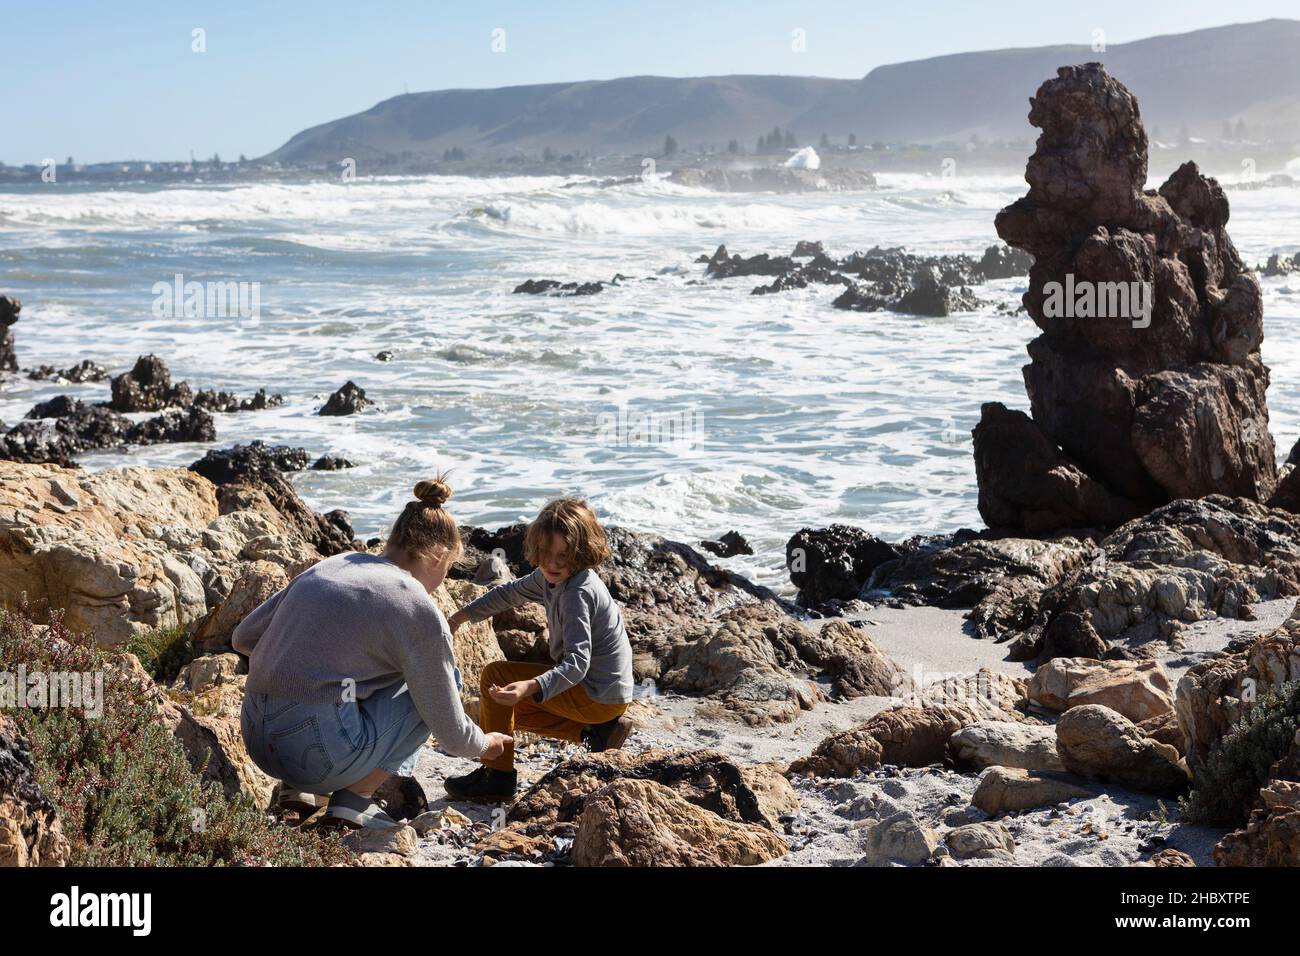 Teenage girl and a boy exploring the rocks and surf, sea fret rising off the breaking waves of the ocean. Stock Photo